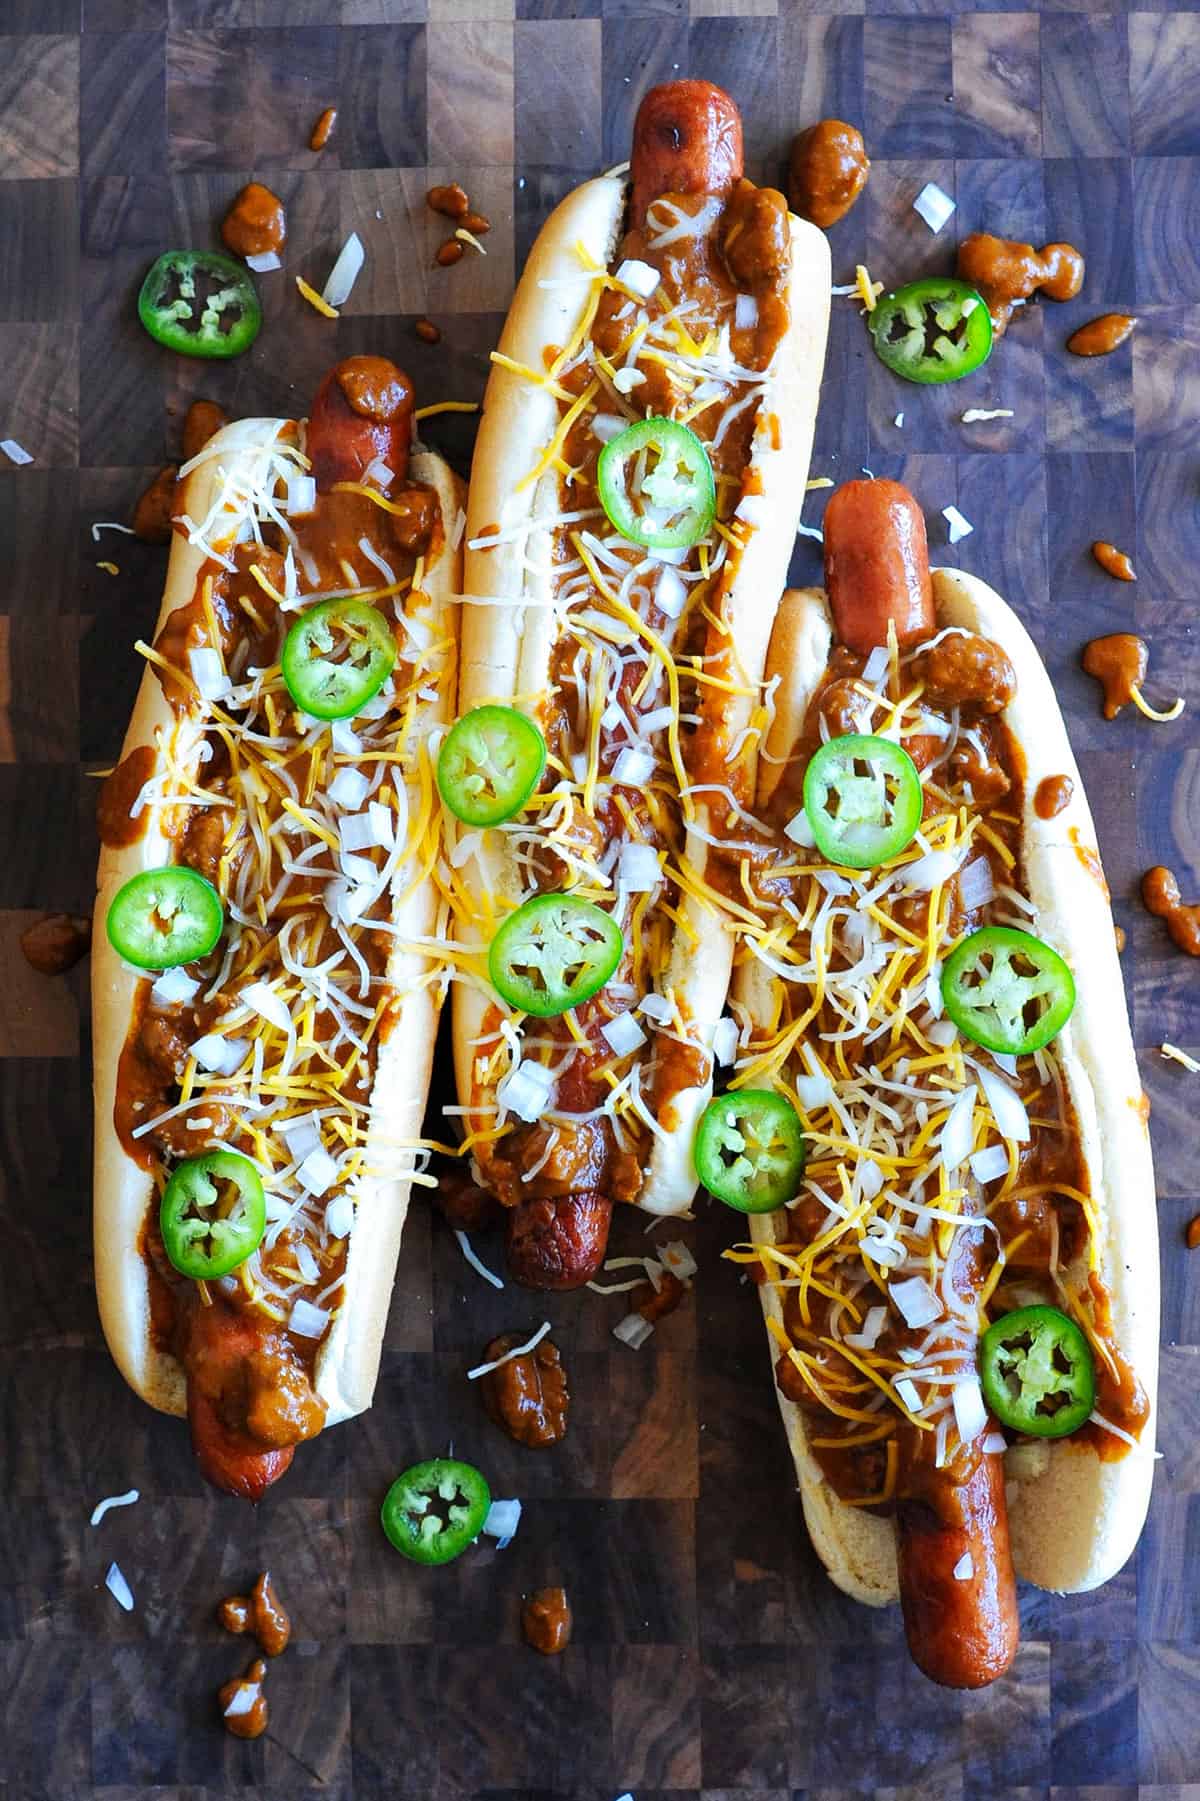 hot dogs topped with chili and jalapenos.